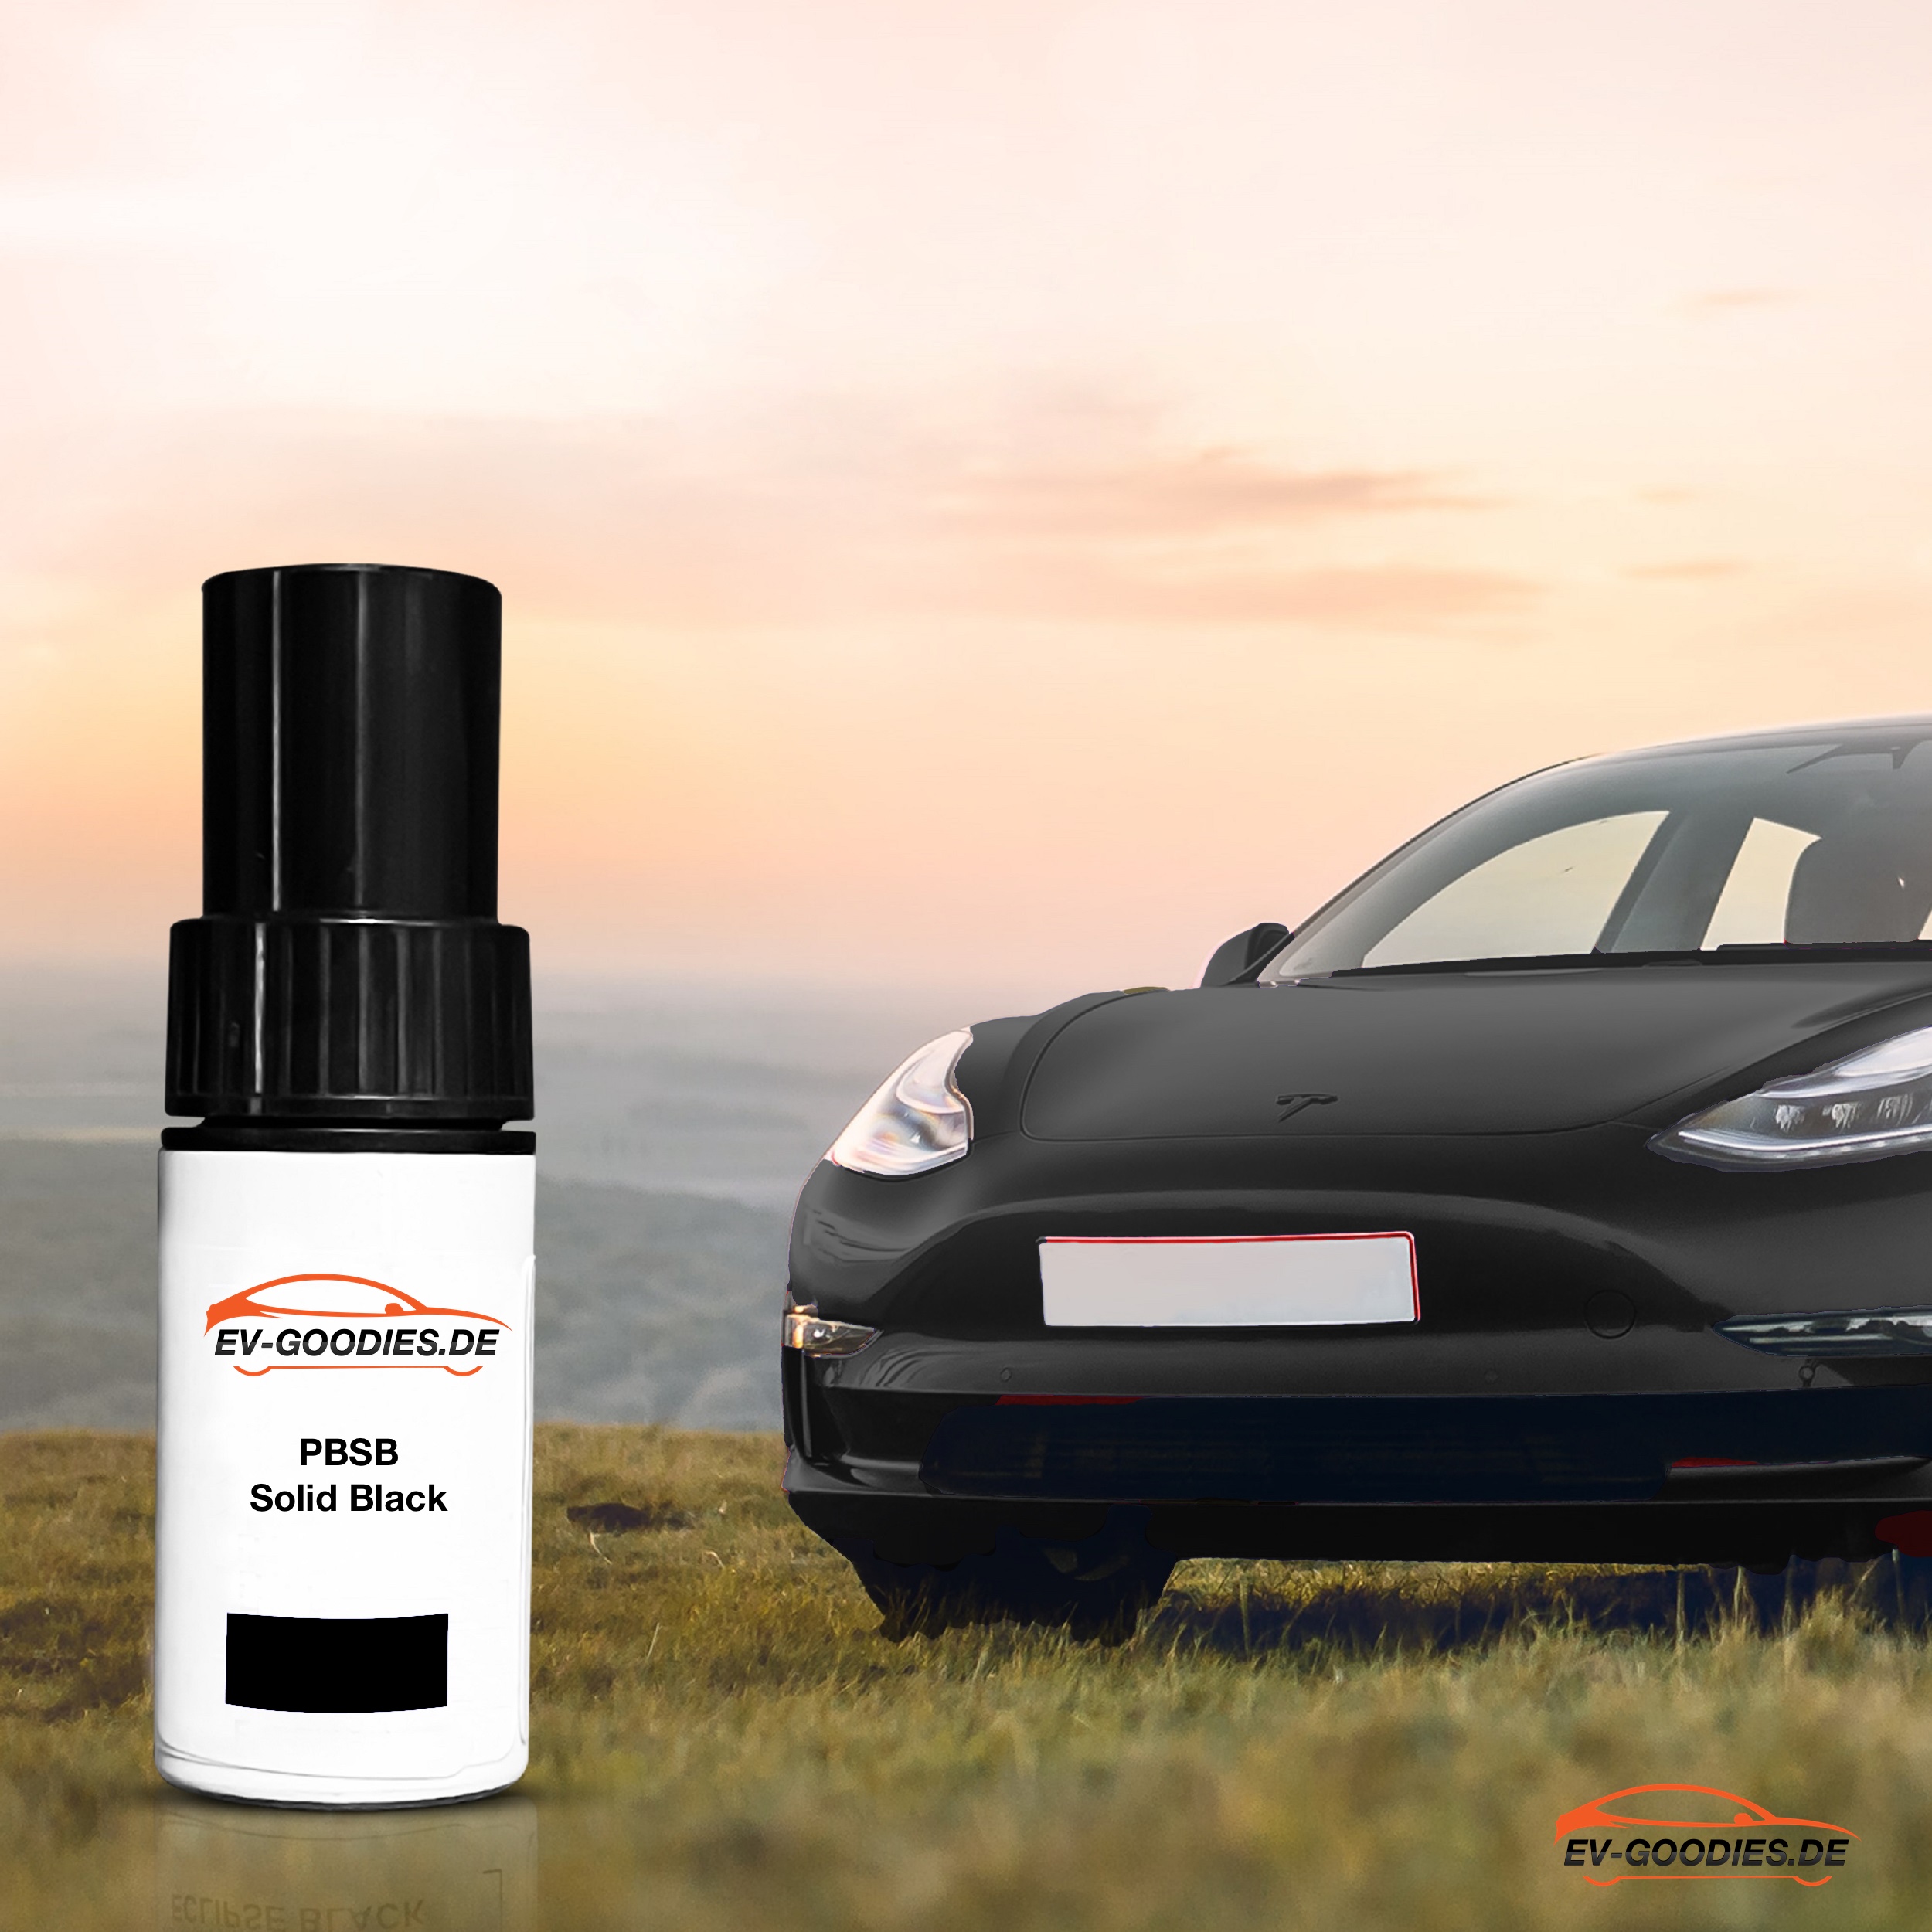 Paint brush black Solid Black for Tesla Model 3, color code: PBSB, paint repair, stone chips